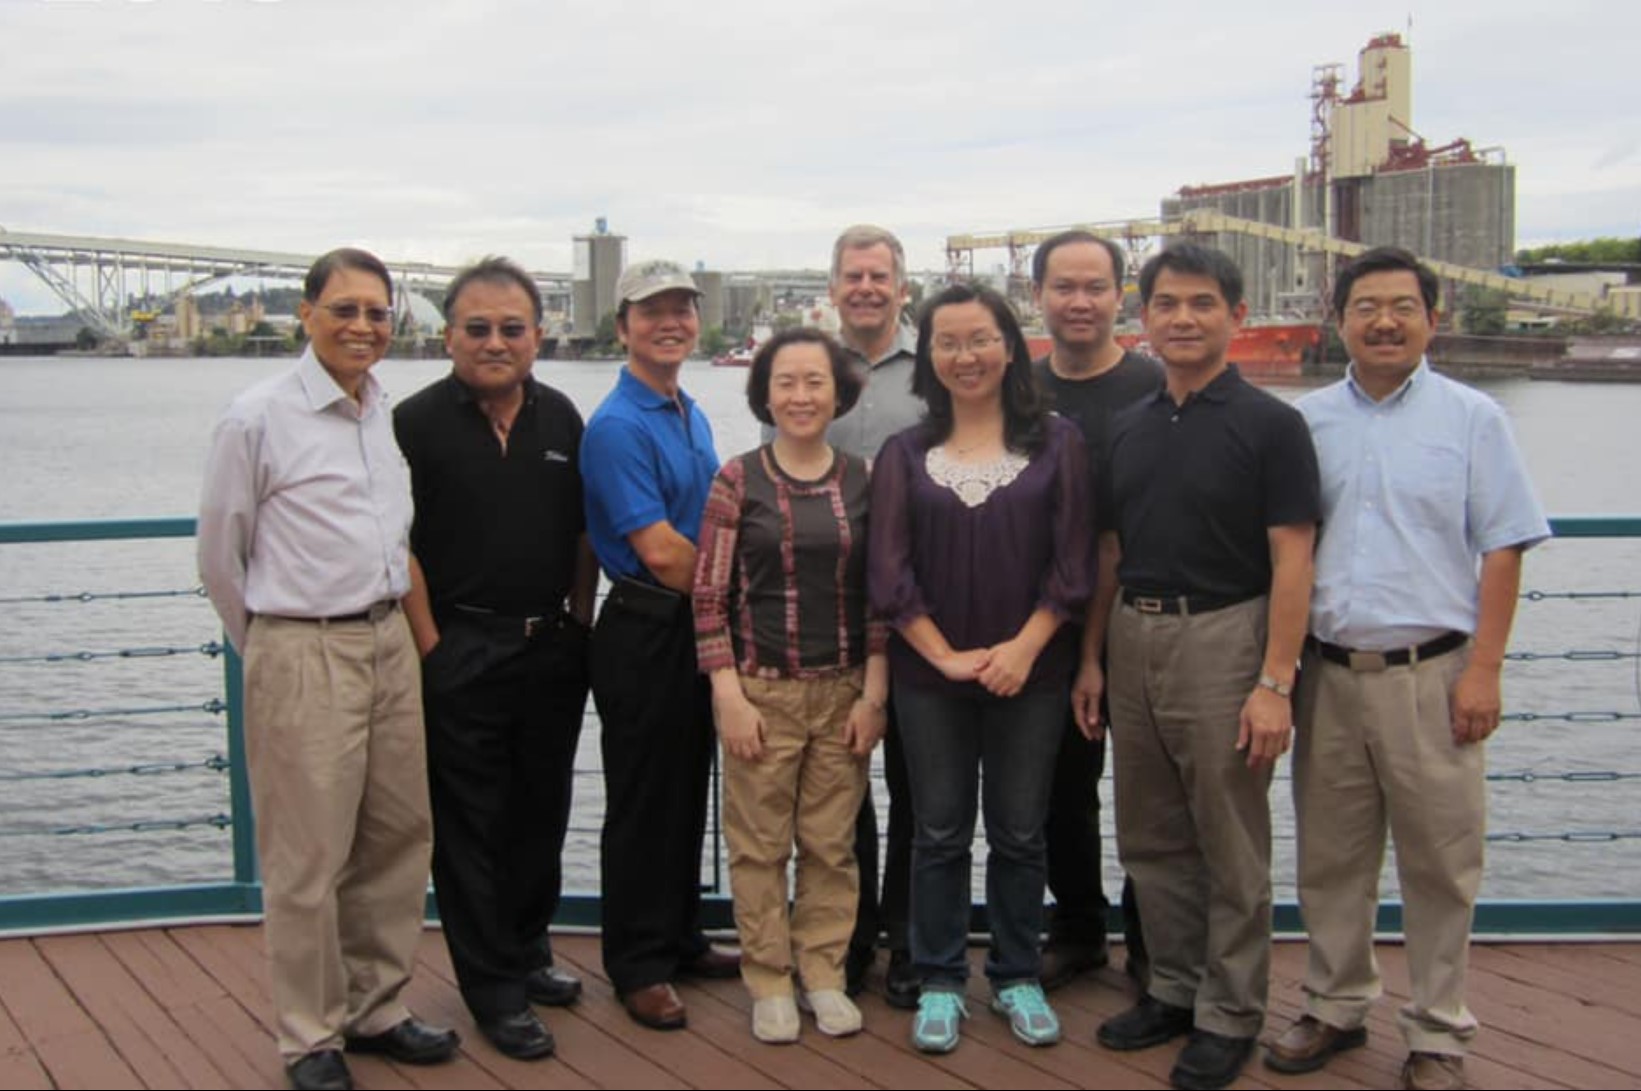 Ron Lu and Taiwan team at the Wheat Marketing Center, Portland, Ore., in 2013.